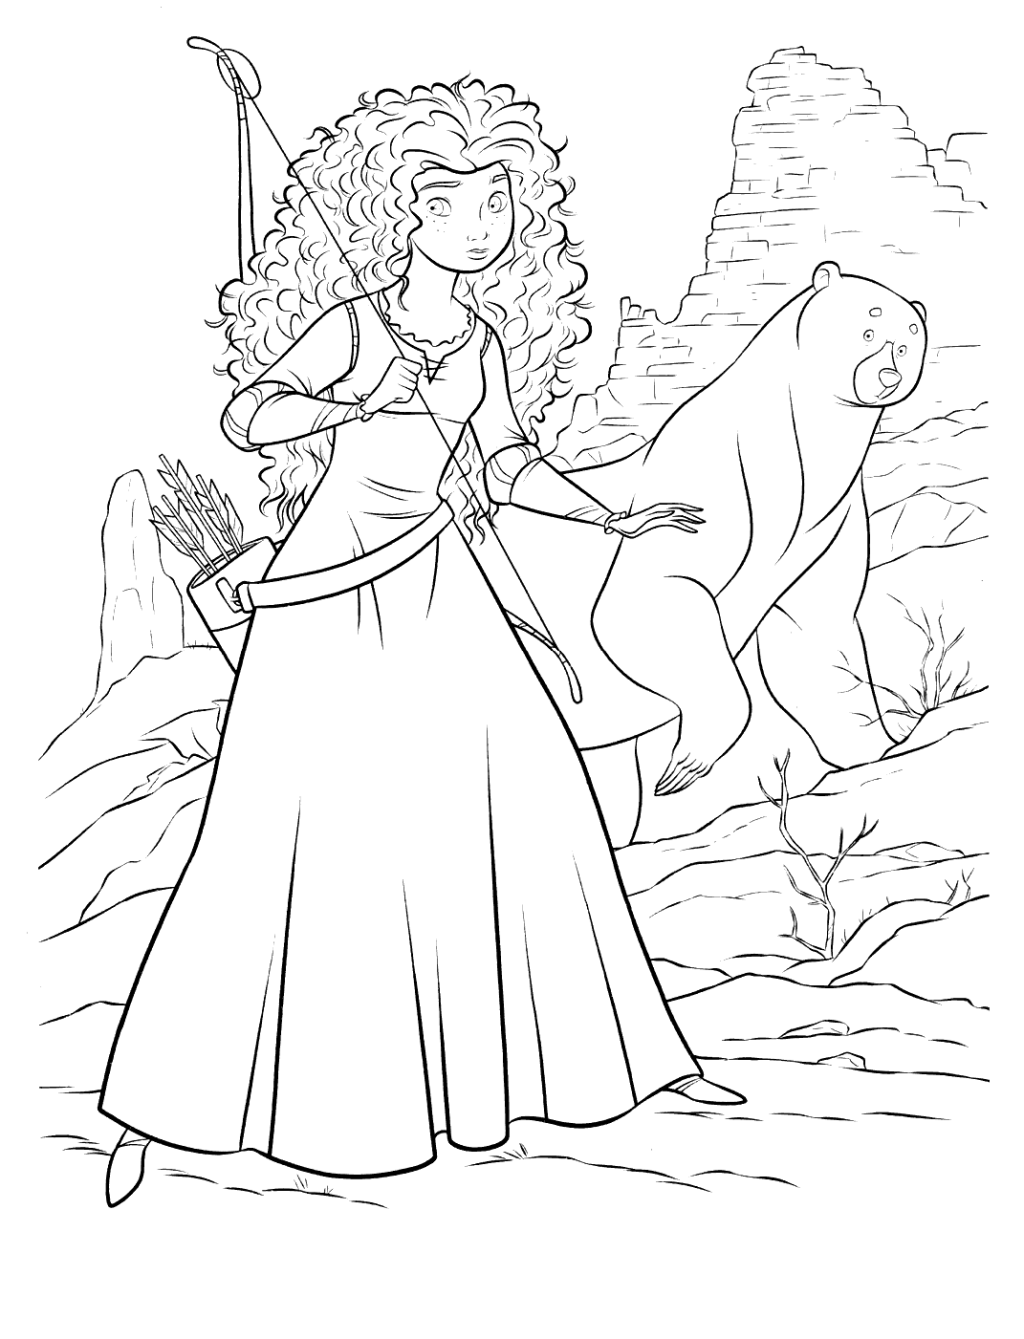 Picture of: Rebel coloring pages for kids – Brave Kids Coloring Pages